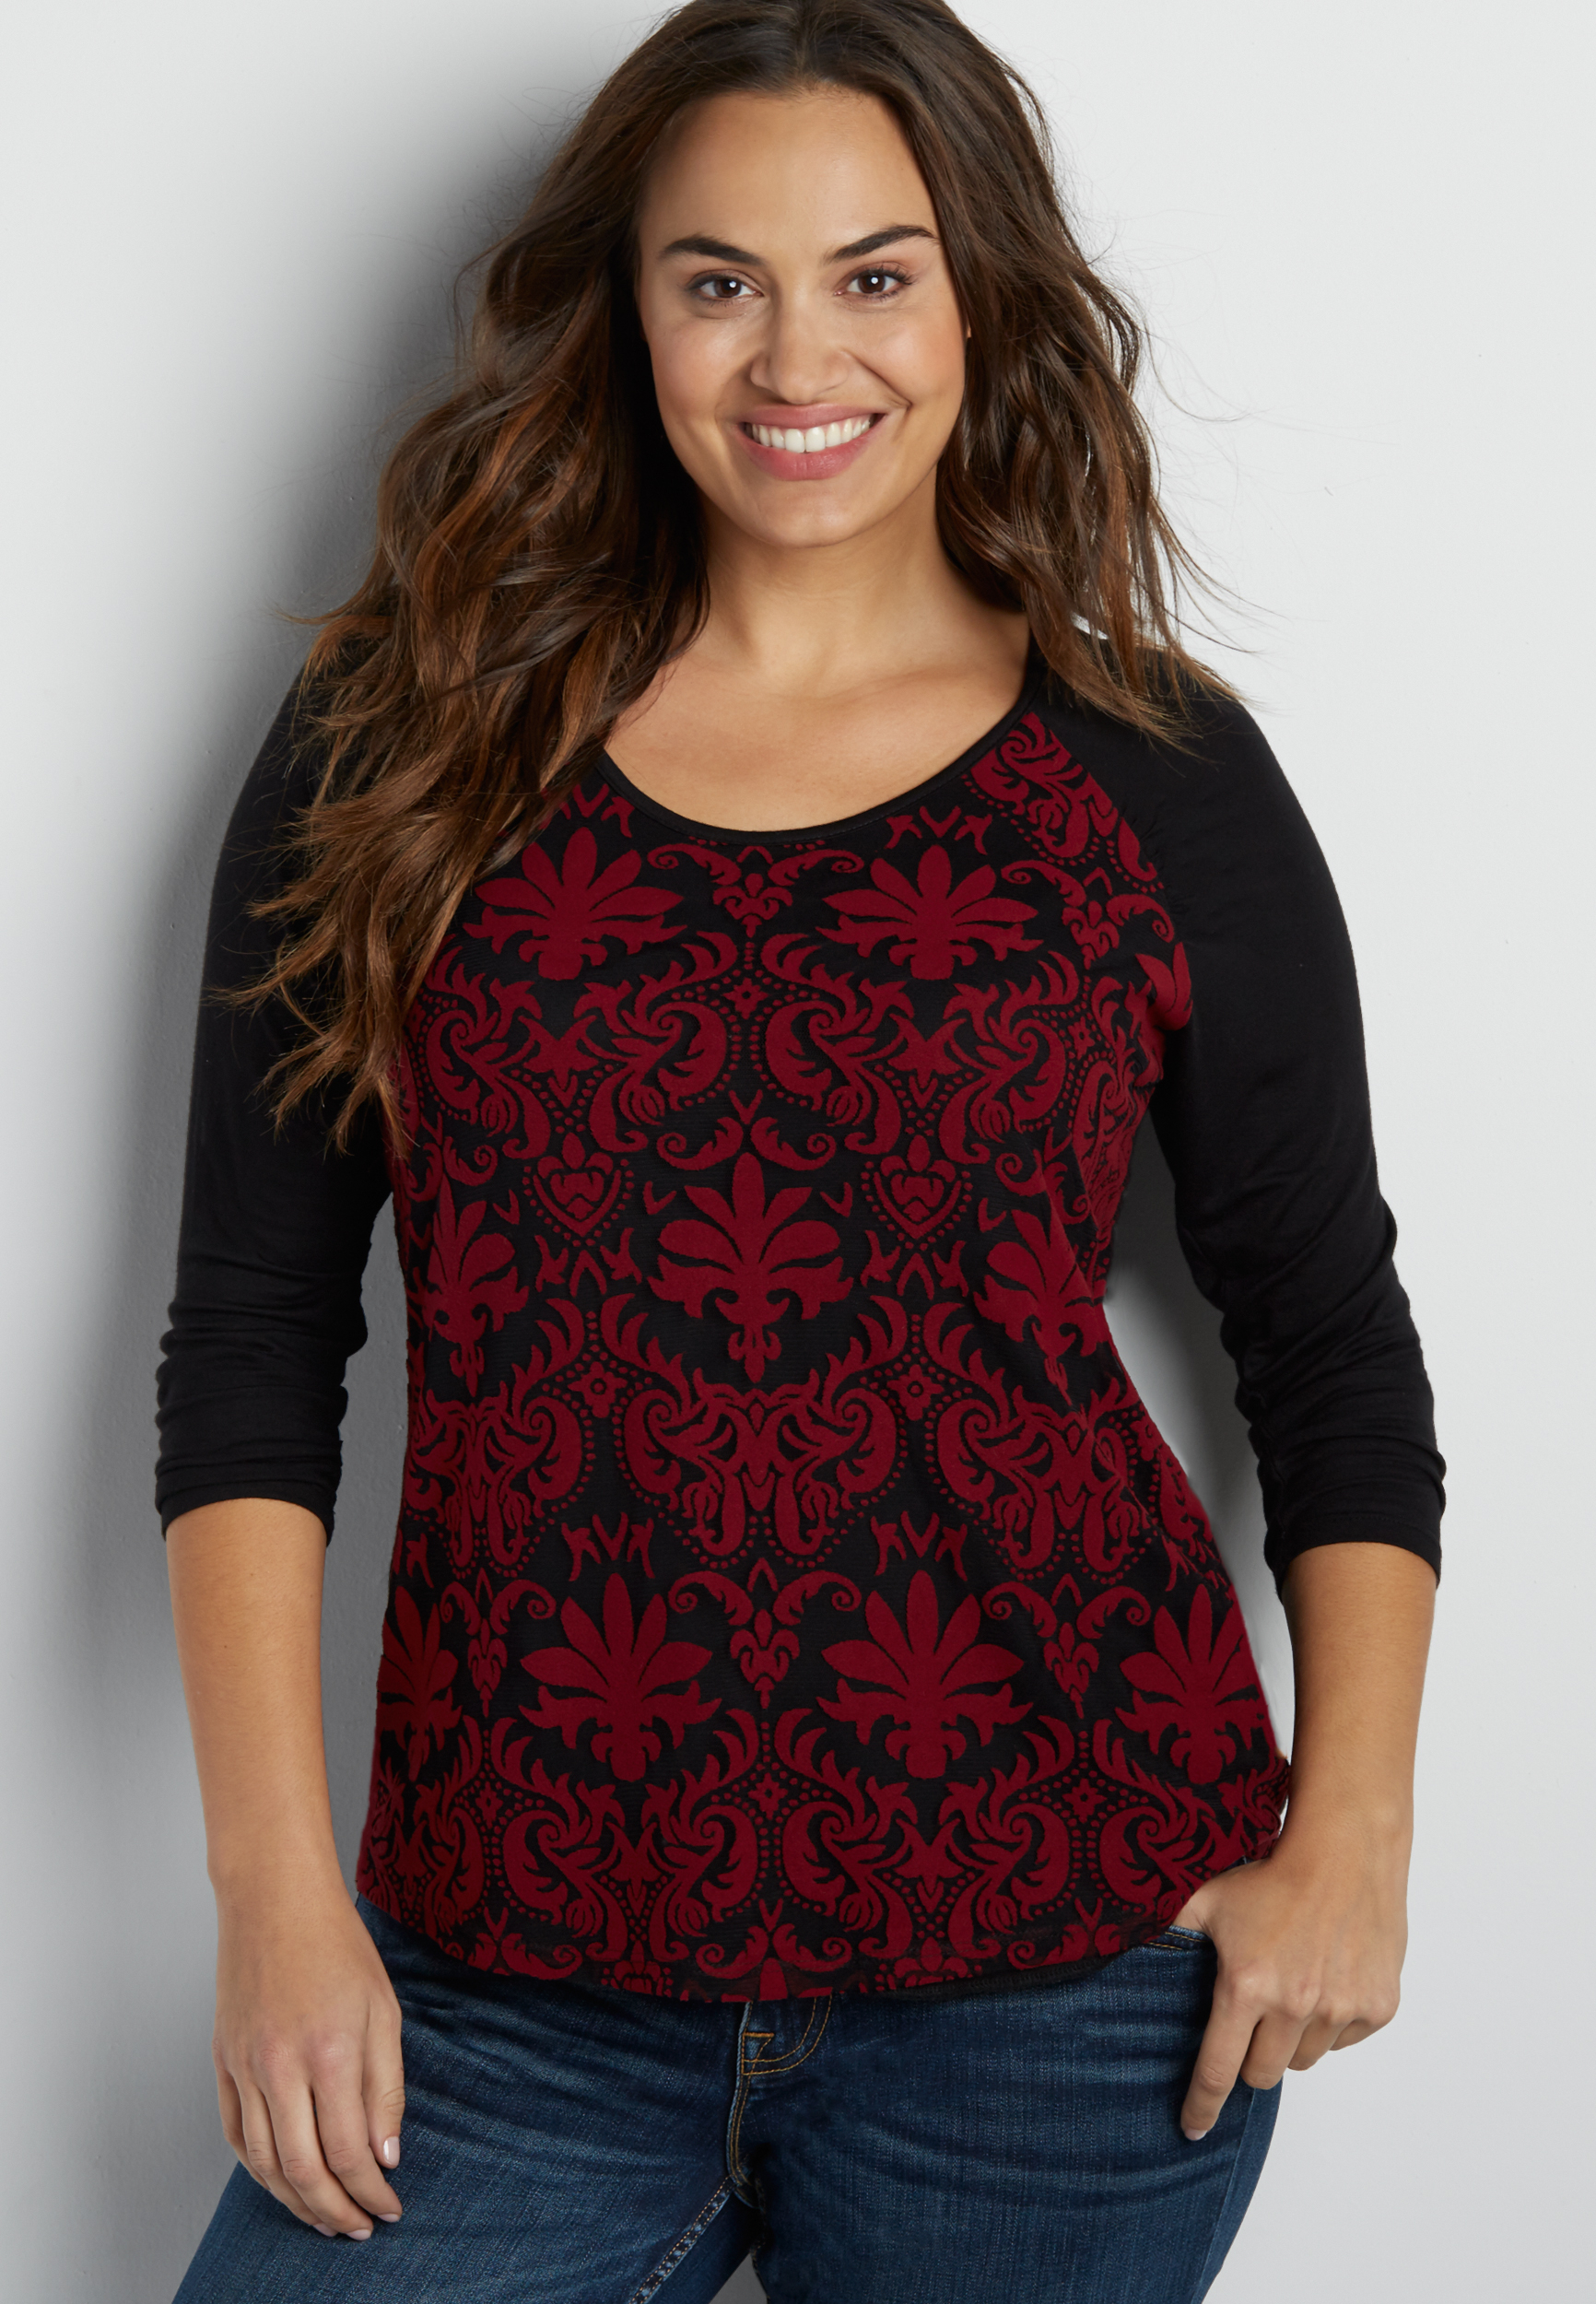 plus size top with velvety patterned overlay | maurices